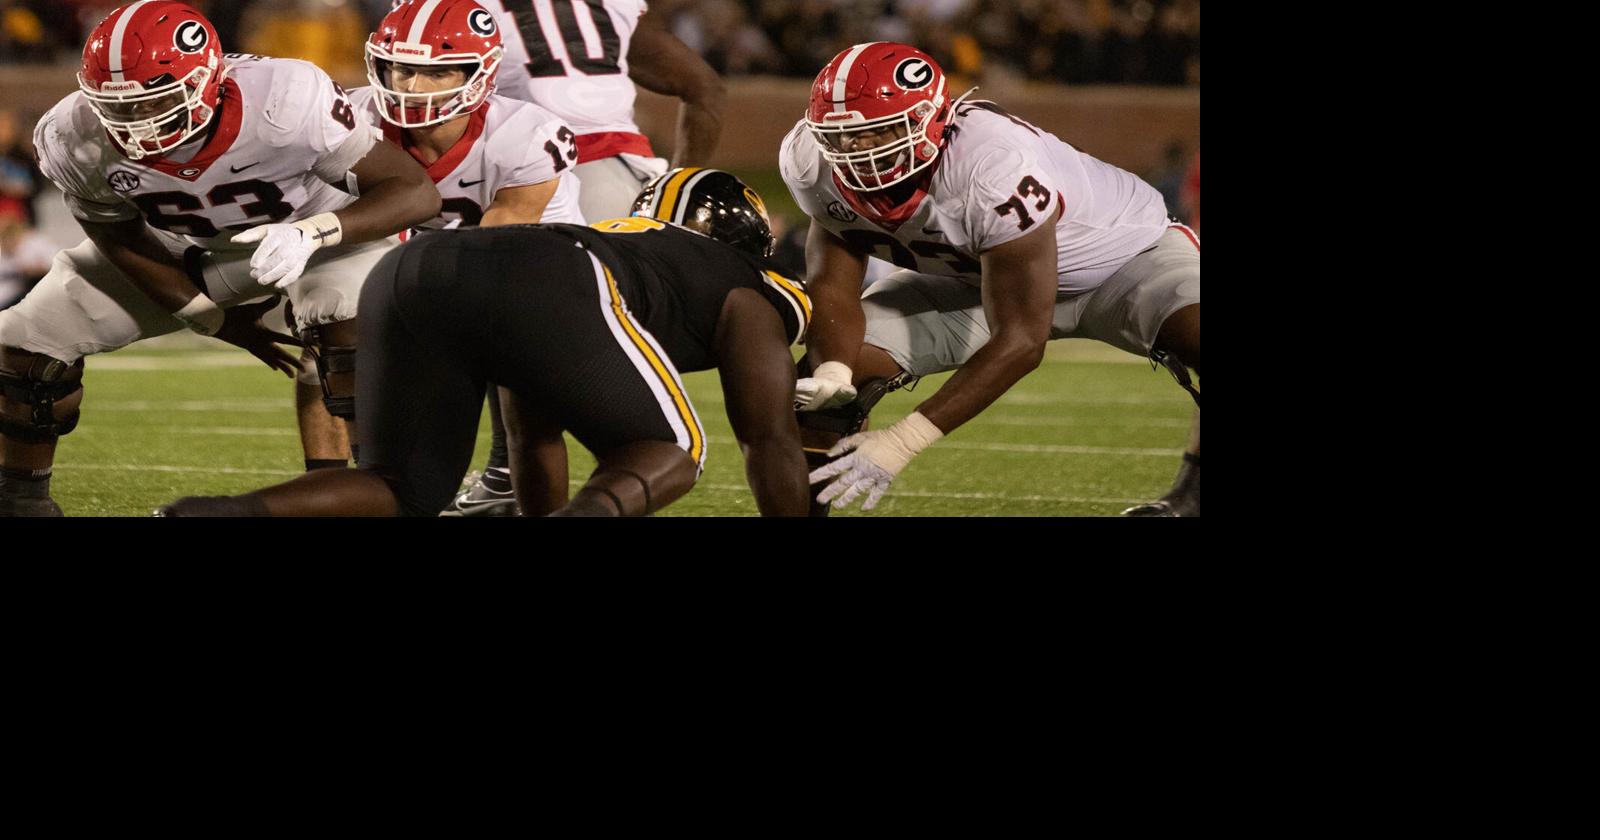 Georgia’s quest for consistency on the offensive line